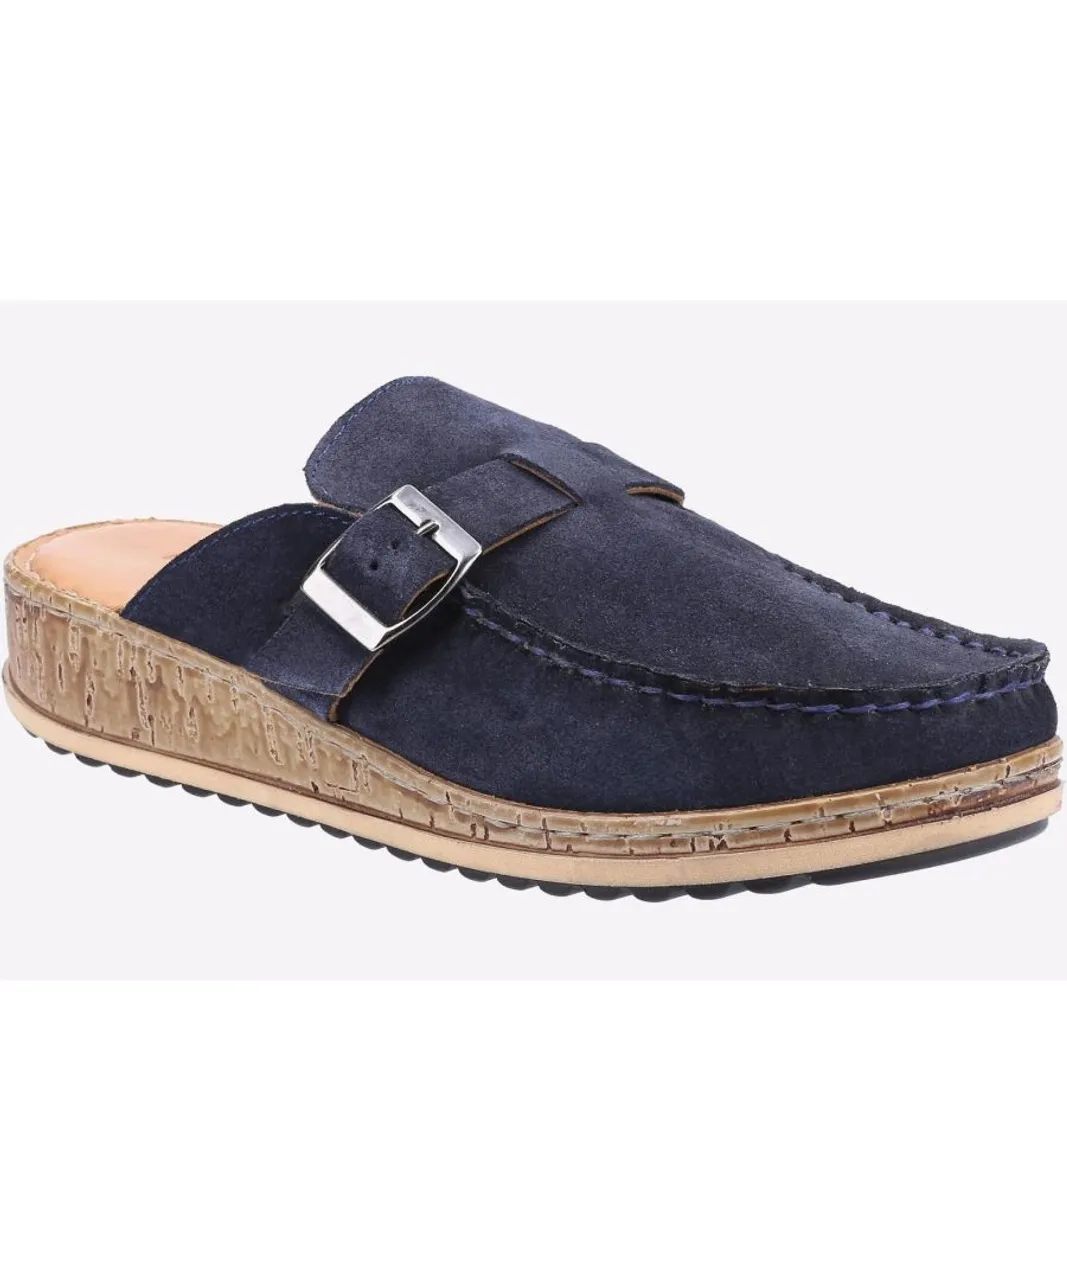 Hush Puppies Sorcha Mule MEMORY FOAM Sandal Womens - Navy Leather (archived)